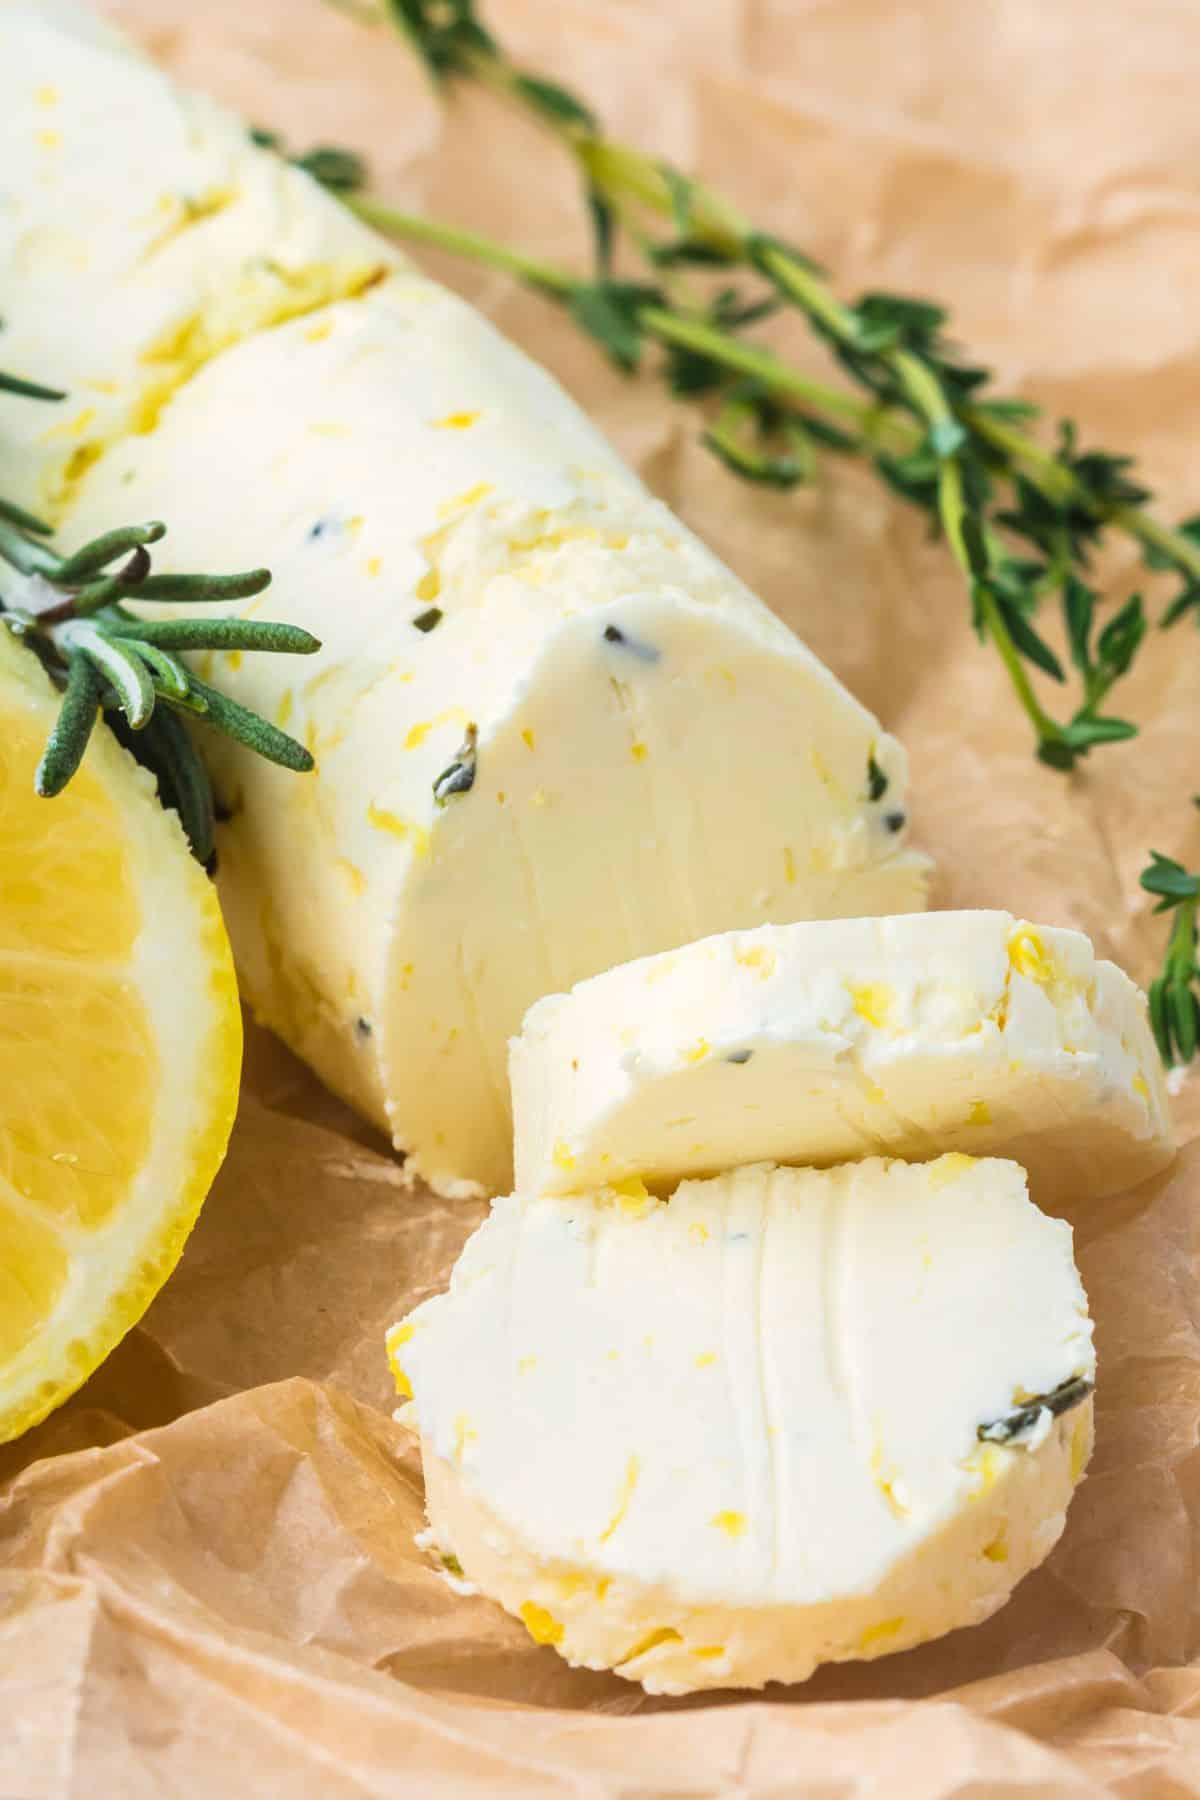 A cylindrical roll of herb-infused butter is sliced on parchment paper with leon and thyme around it.